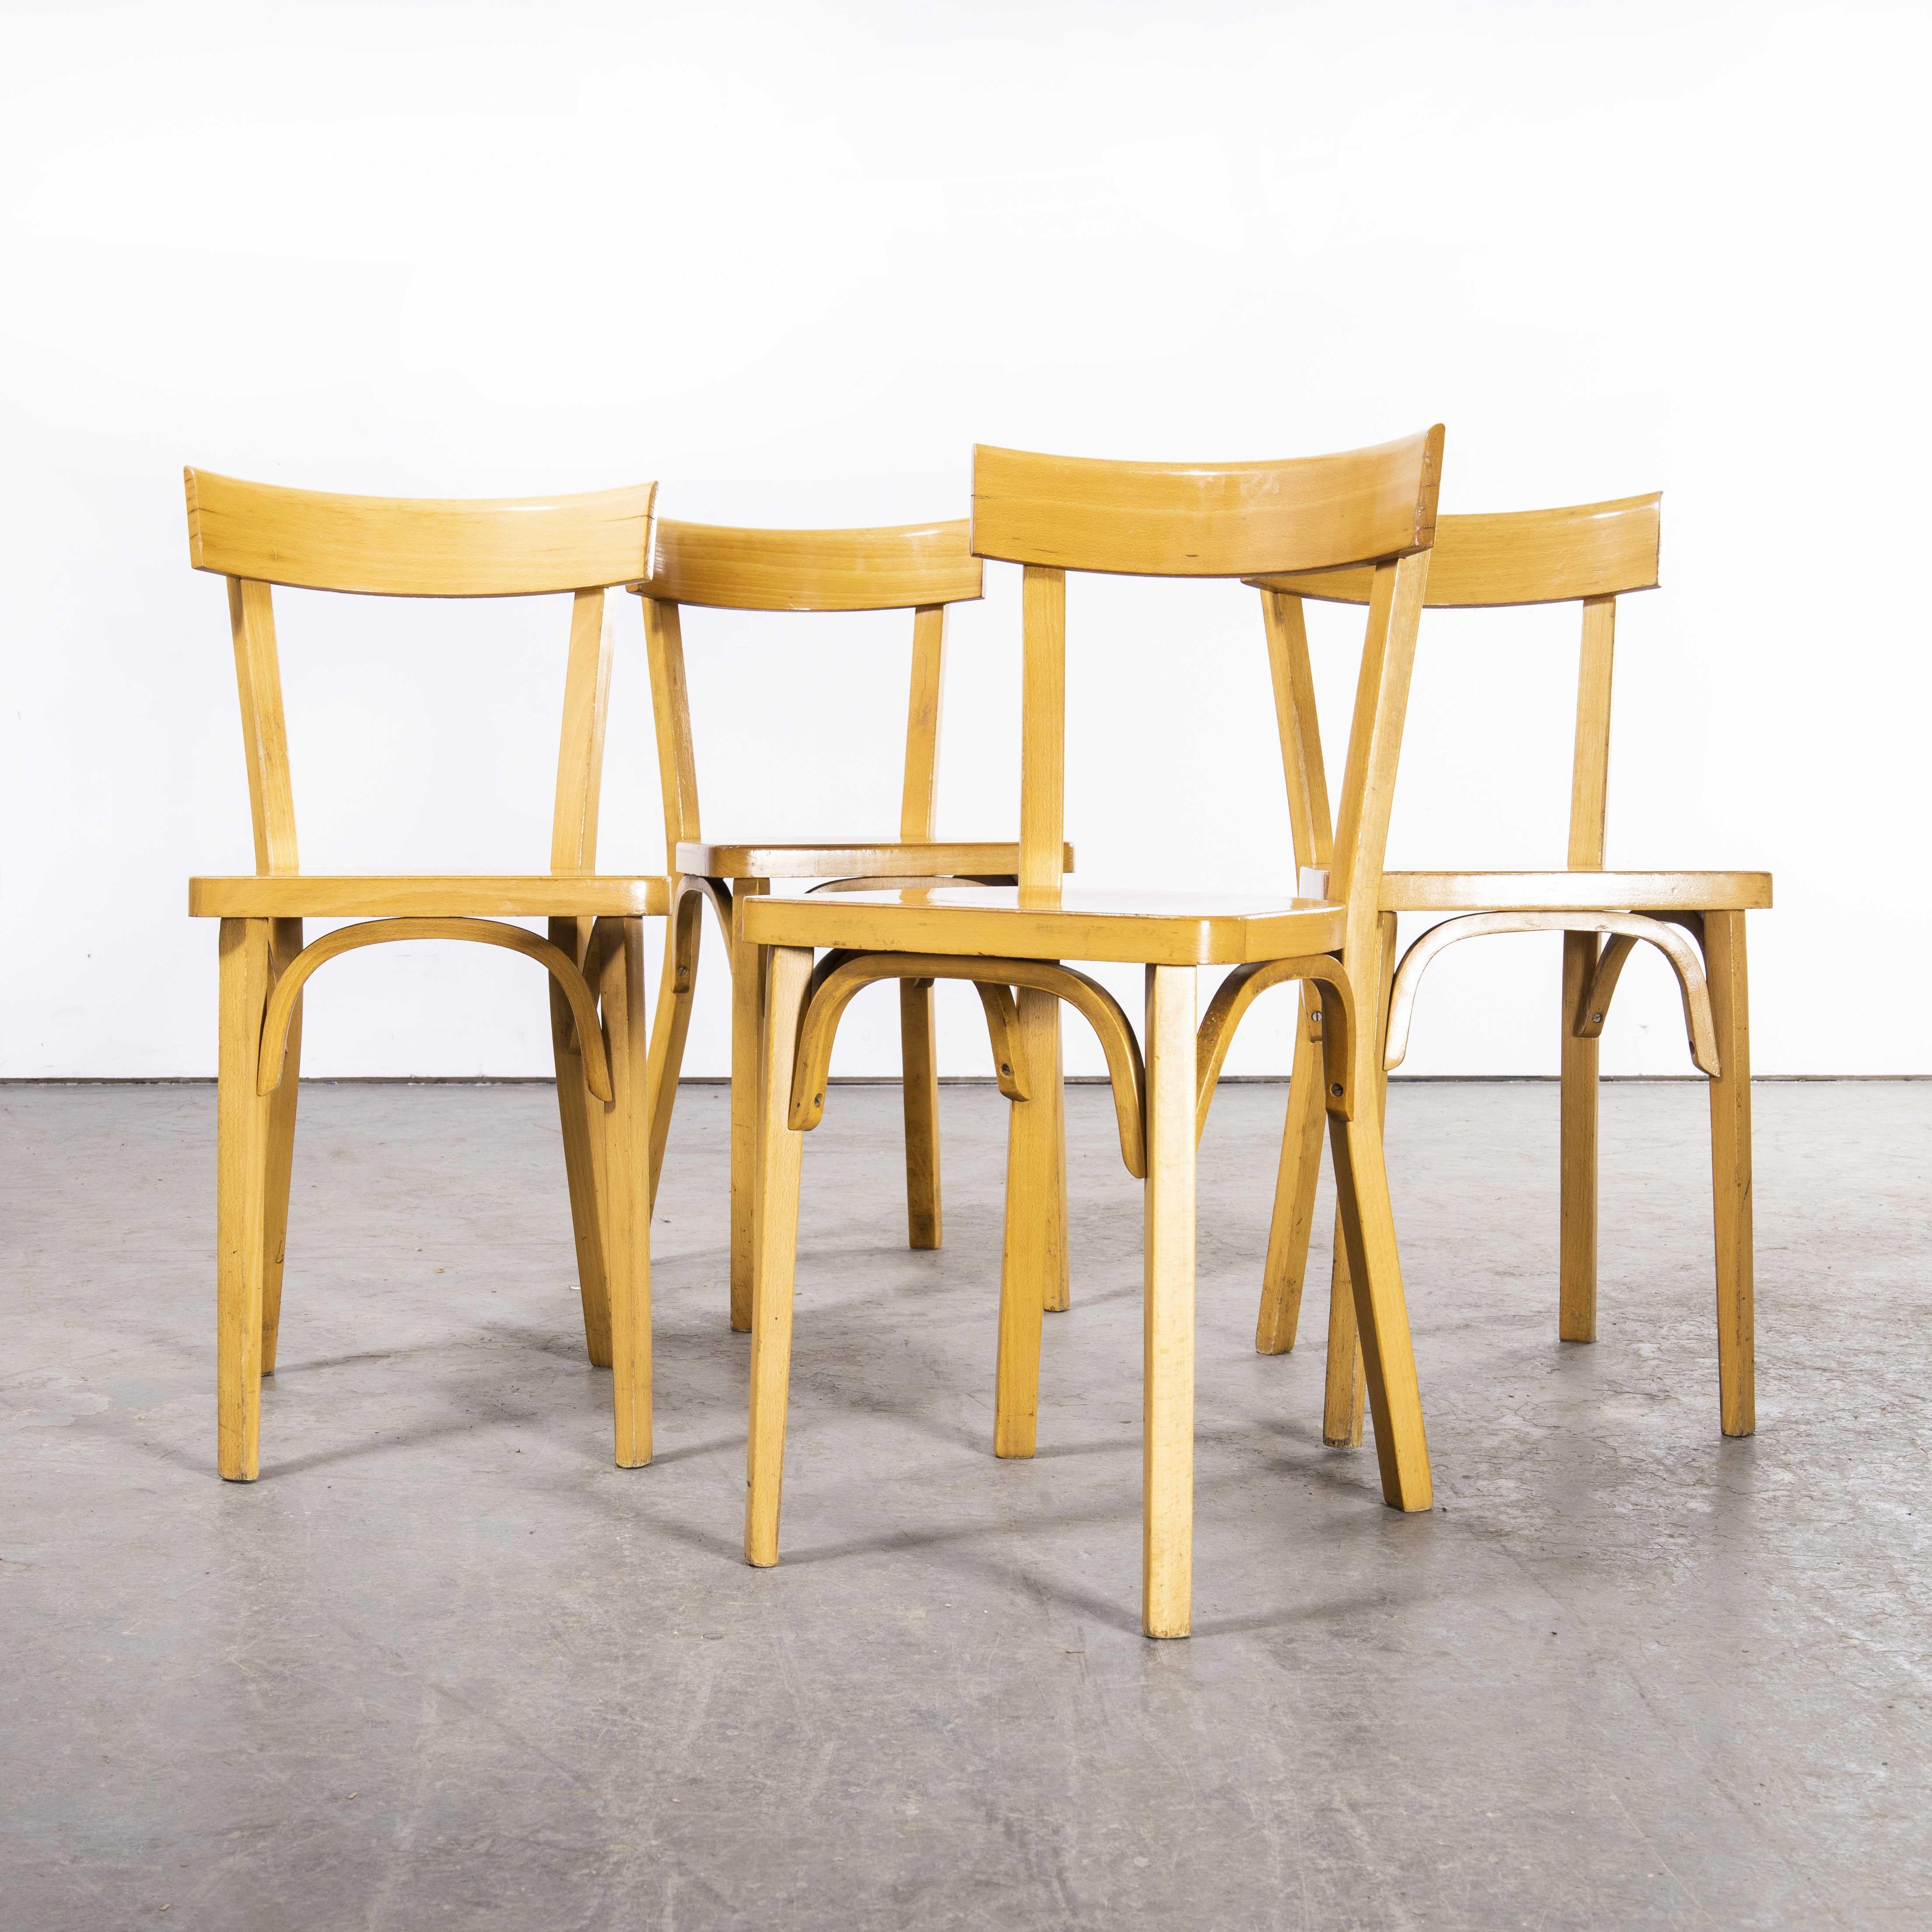 1950’s French Baumann blonde slim back bentwood dining chairs – set of four
1950’s French Baumann blonde slim back bentwood dining chairs – set of four. Baumann is a slightly off the radar French producer just starting to gain traction in the